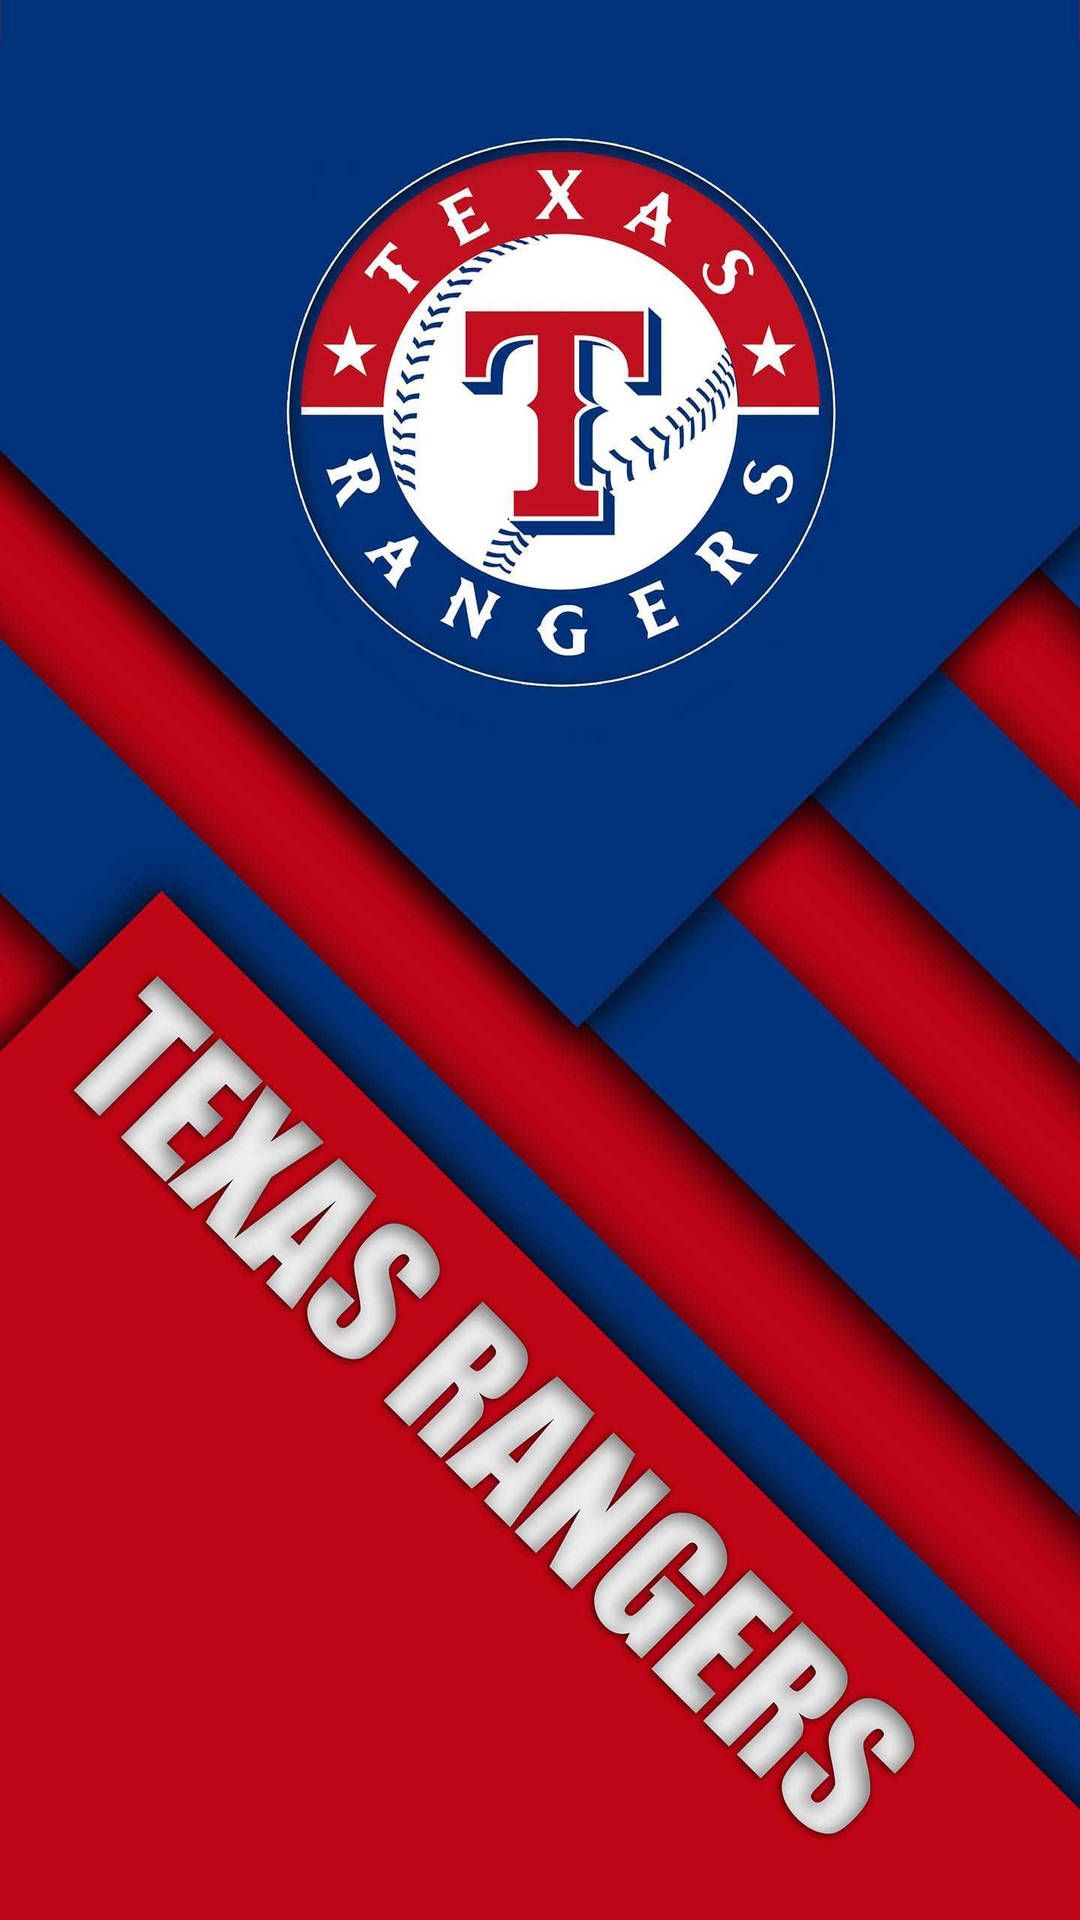 The texas rangers logo is on a red and blue background - Texas